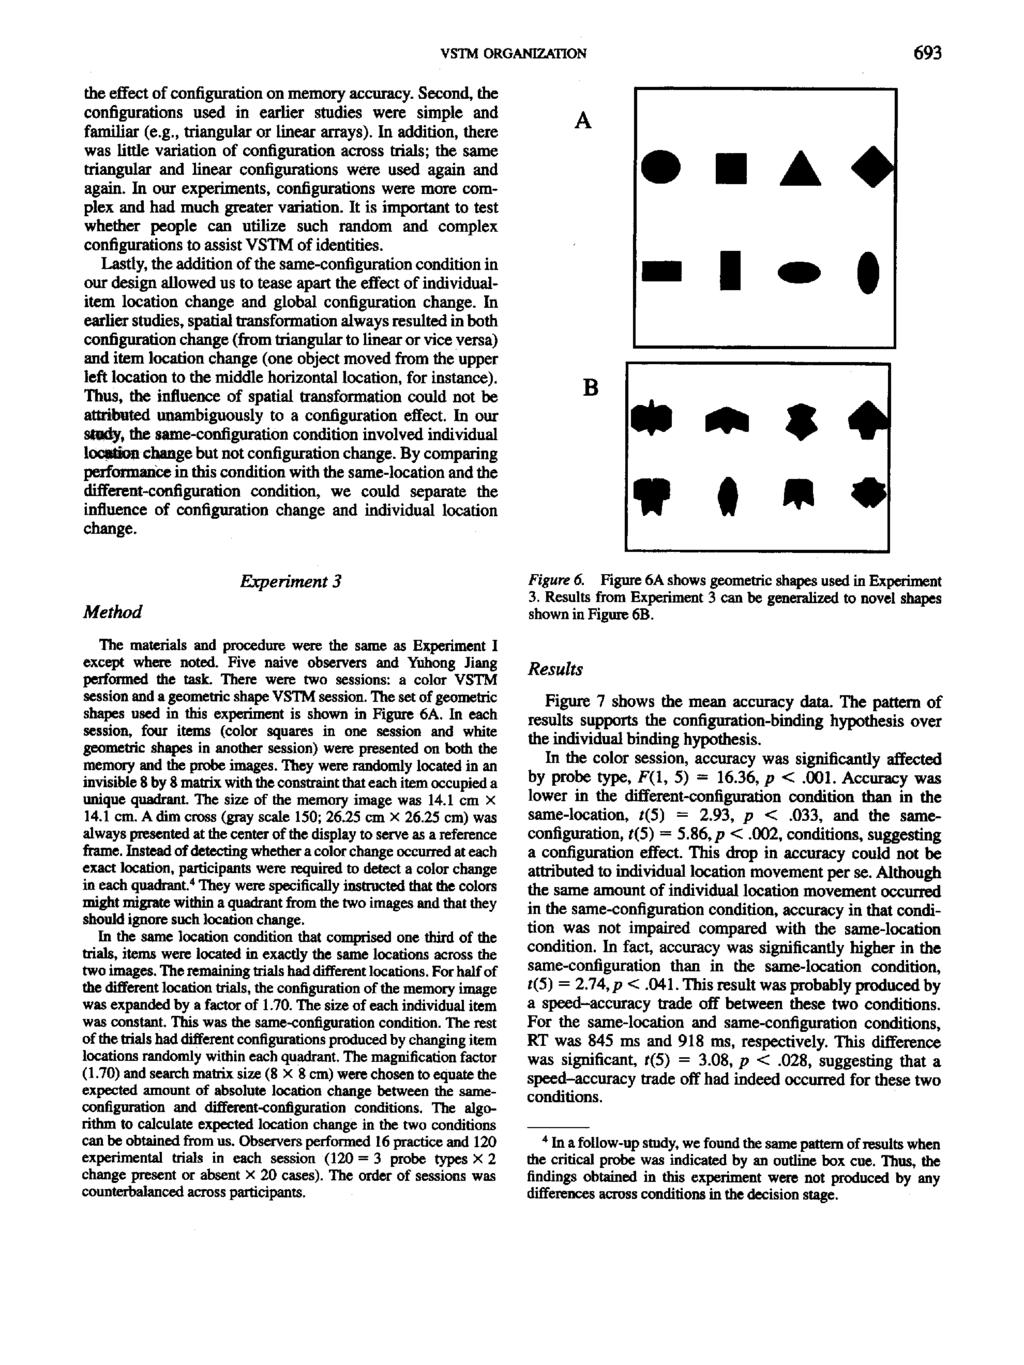 VSTM ORGANIZATION 693 the effect of configuration on memory accuracy. Second, the configurations used in earlier studies were simple and familiar (e.g., triangular or linear arrays).